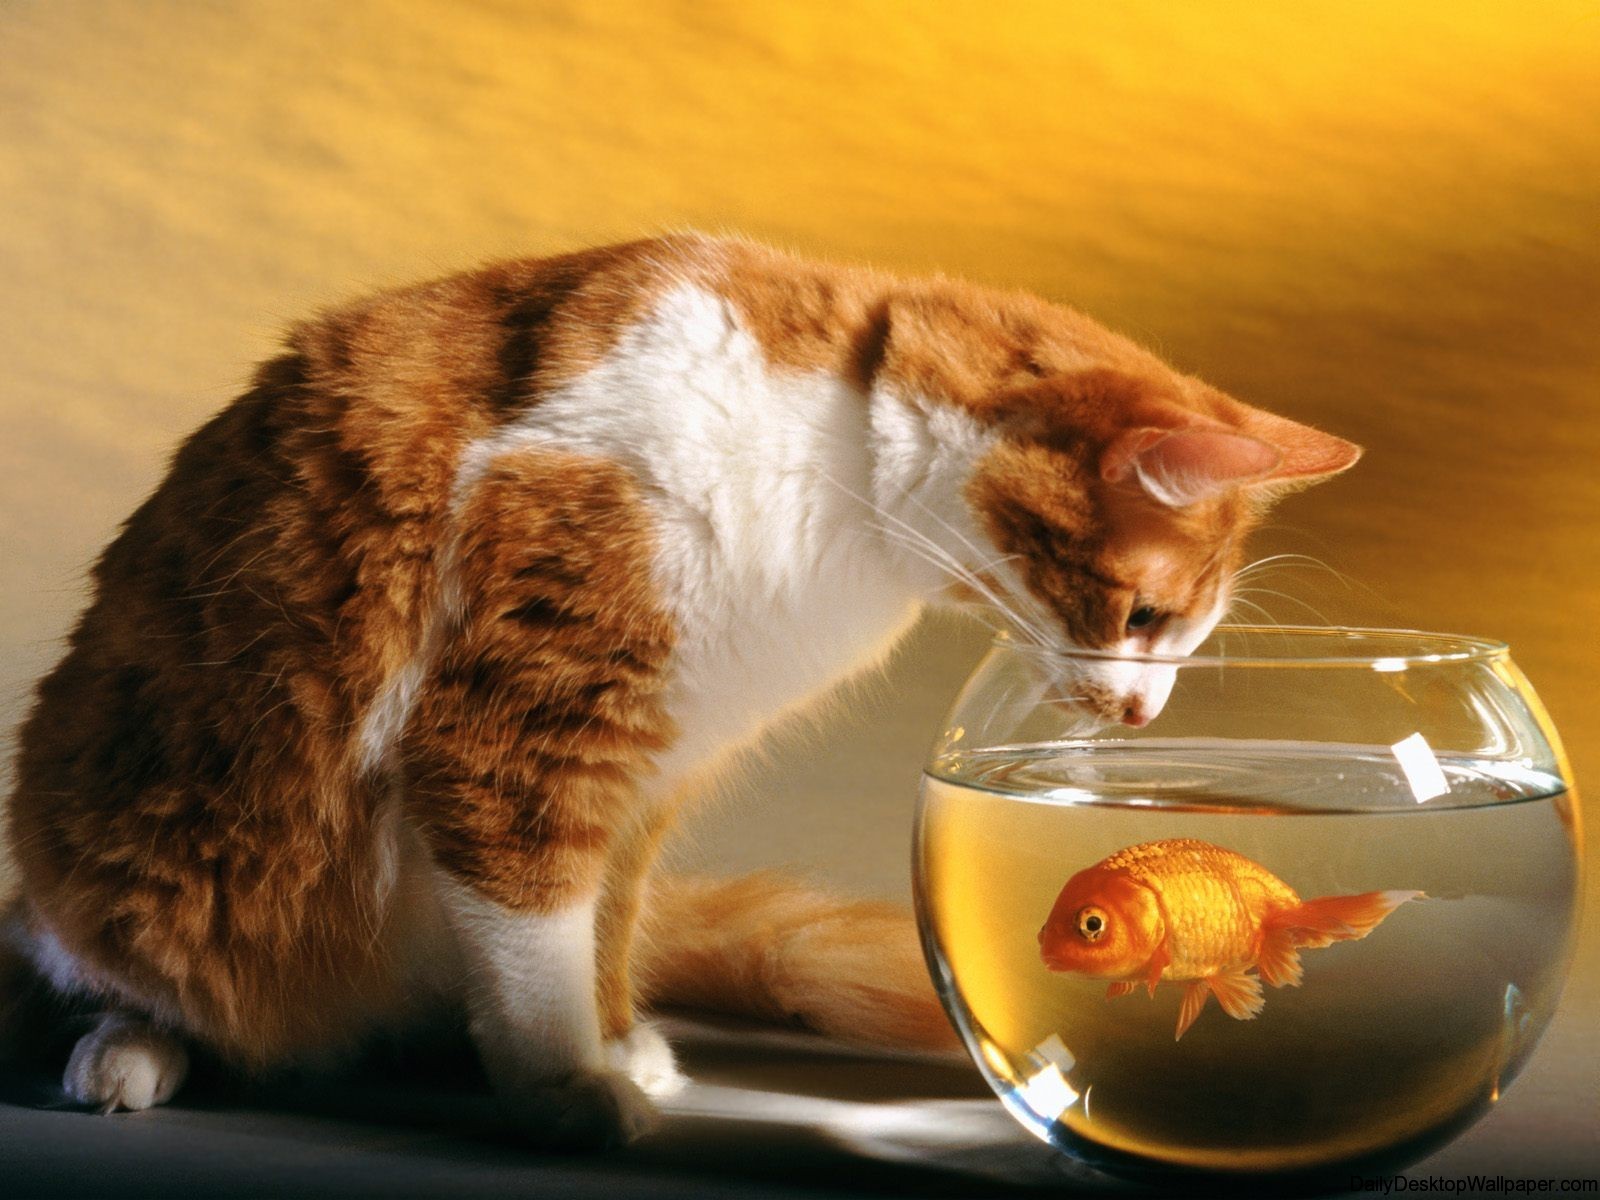 Cat and goldfish wallpaper - High Definition, High Resolution HD Wallpapers  : High Definition, High Resolution HD Wallpapers